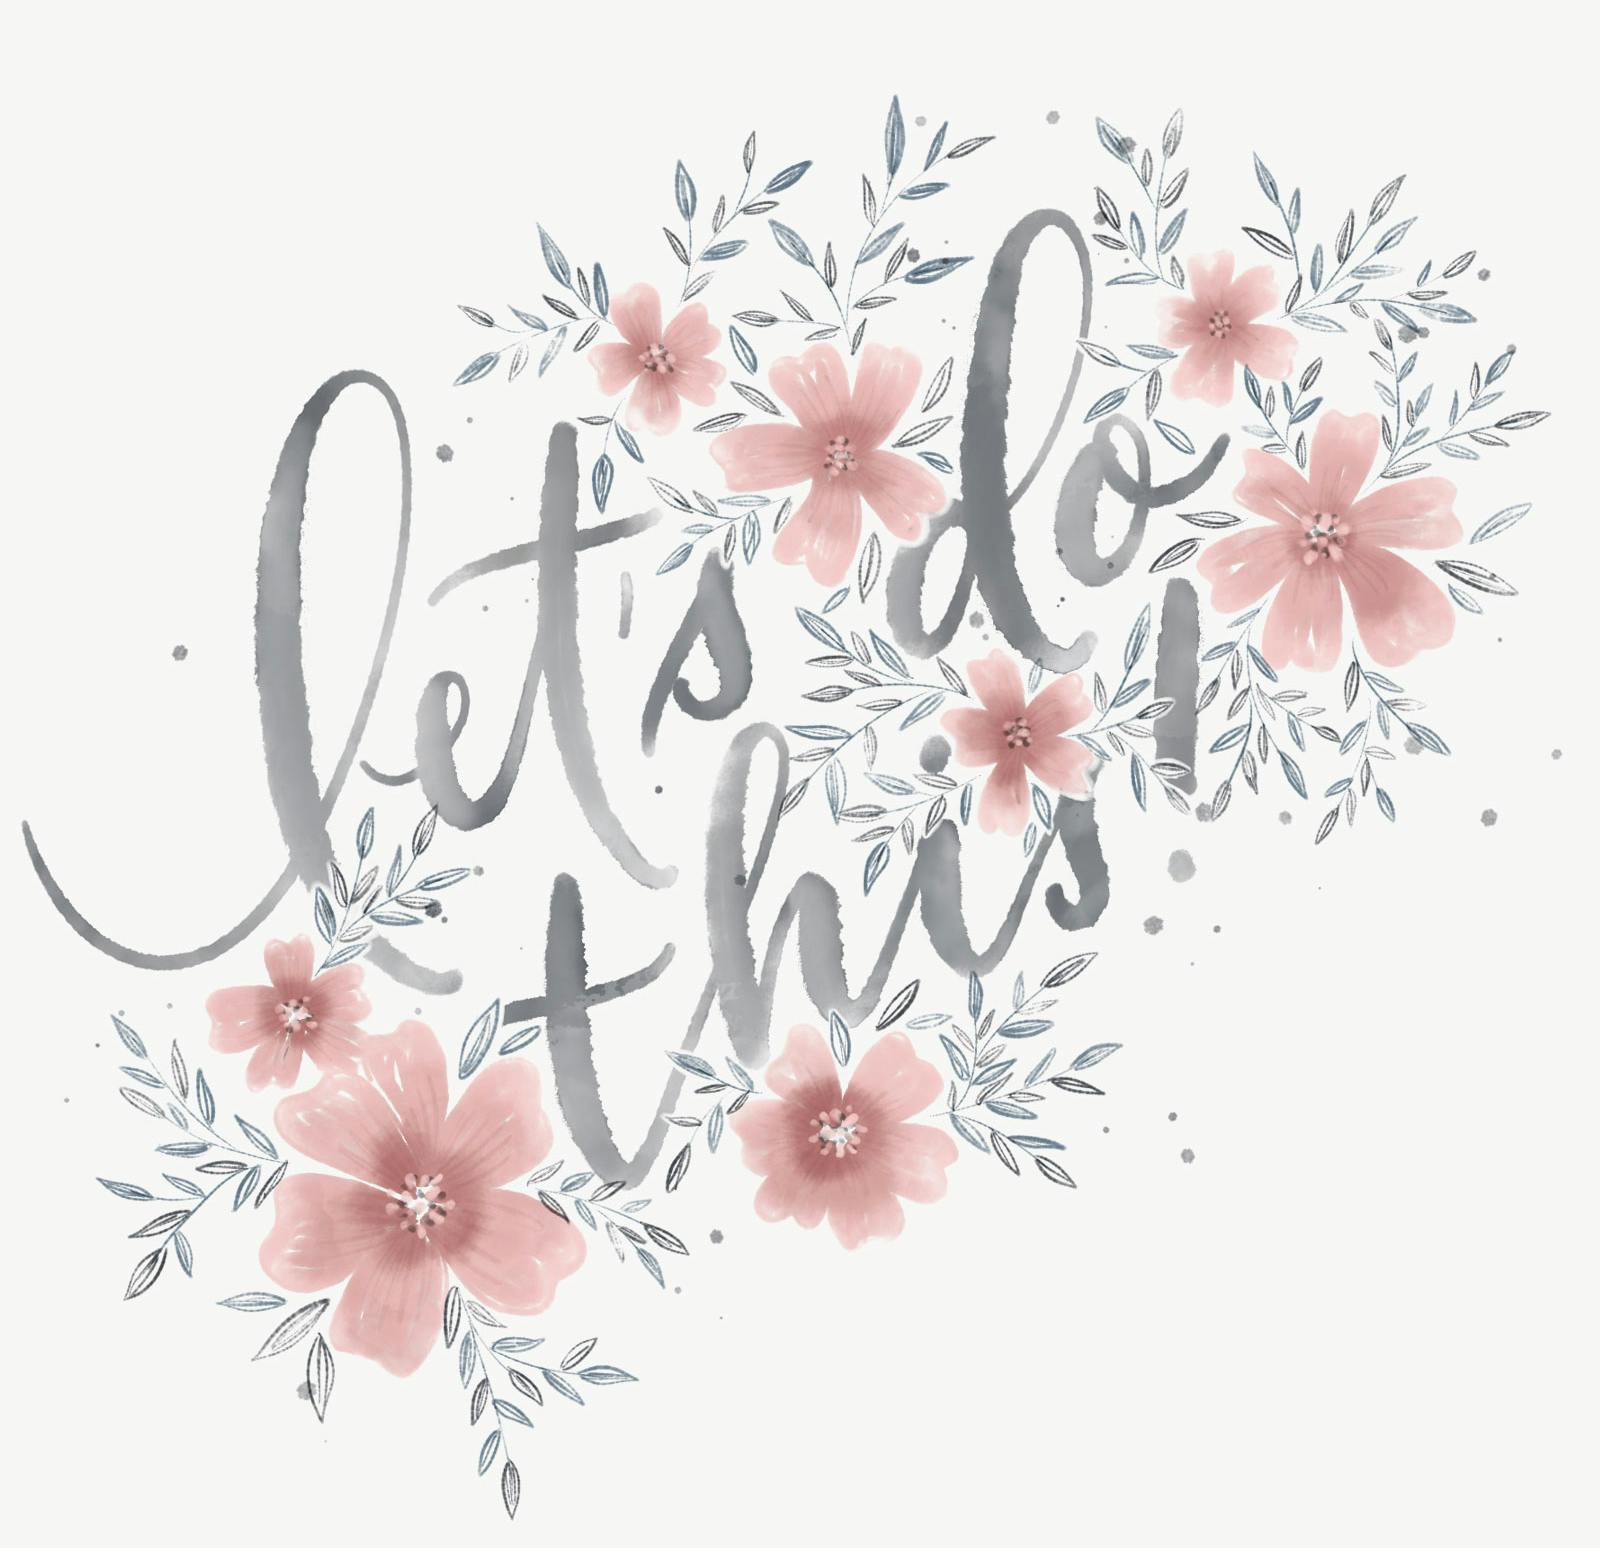 Enroll in Watercolor lettering for Procreate today!